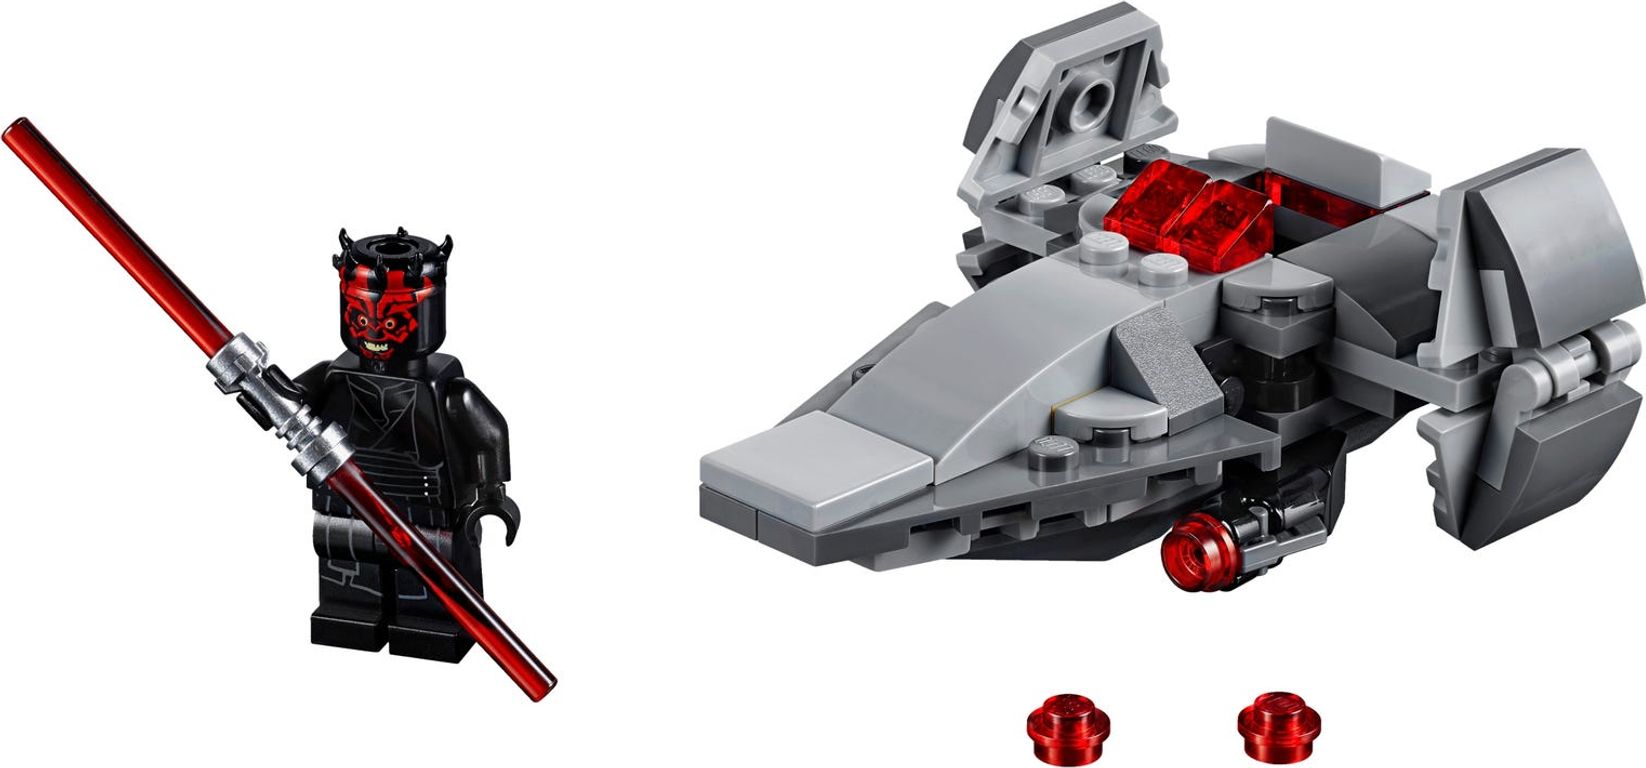 LEGO® Star Wars Sith Infiltrator™ Microfighter components